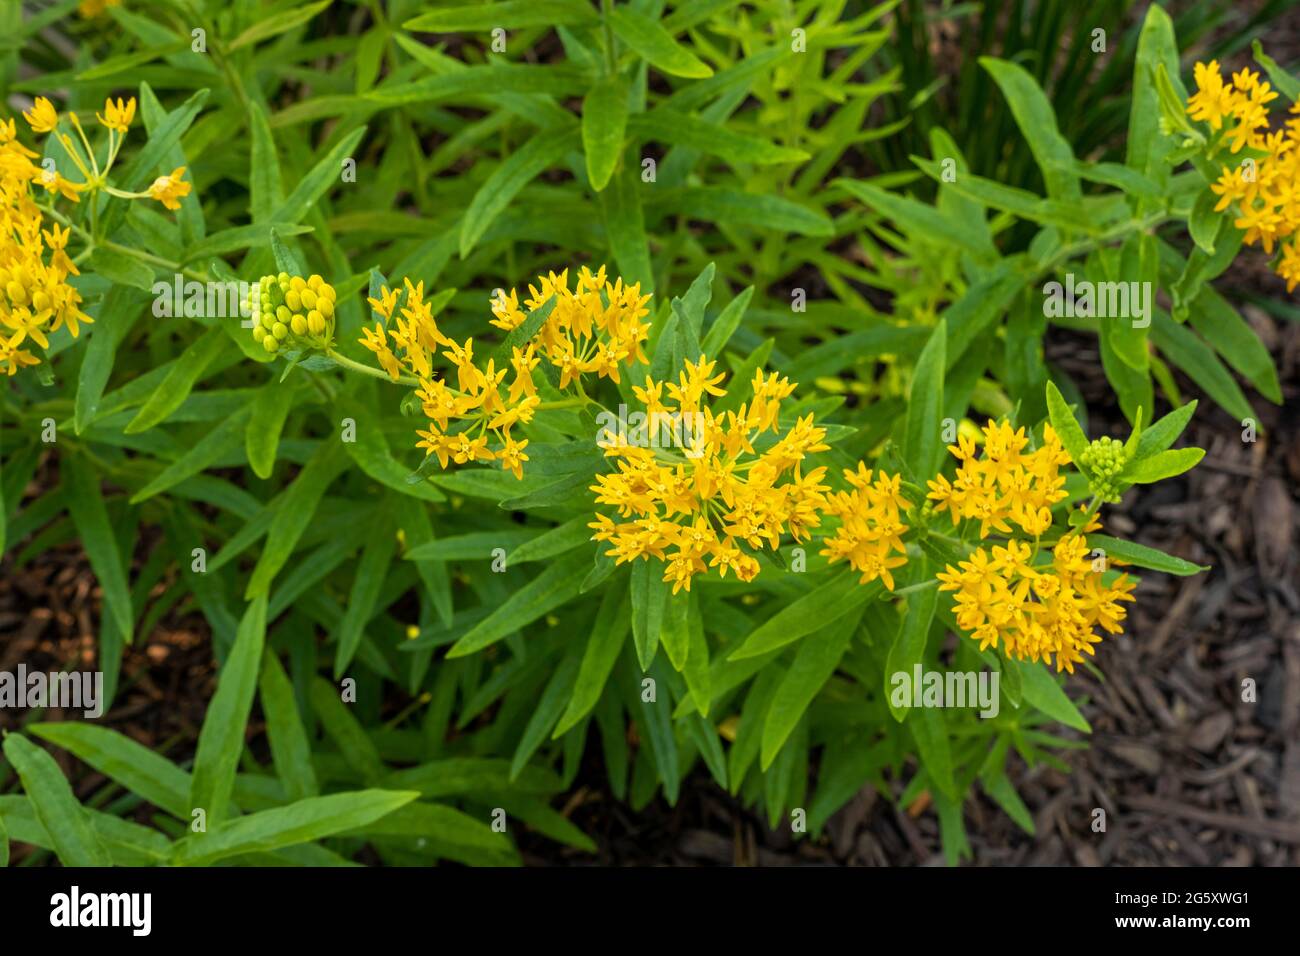 Asclepias tuberosa, yellow milkweed or butterfly weed, 'Hello Yellow' in a garden bed in bloom. Kansas, USA. Stock Photo